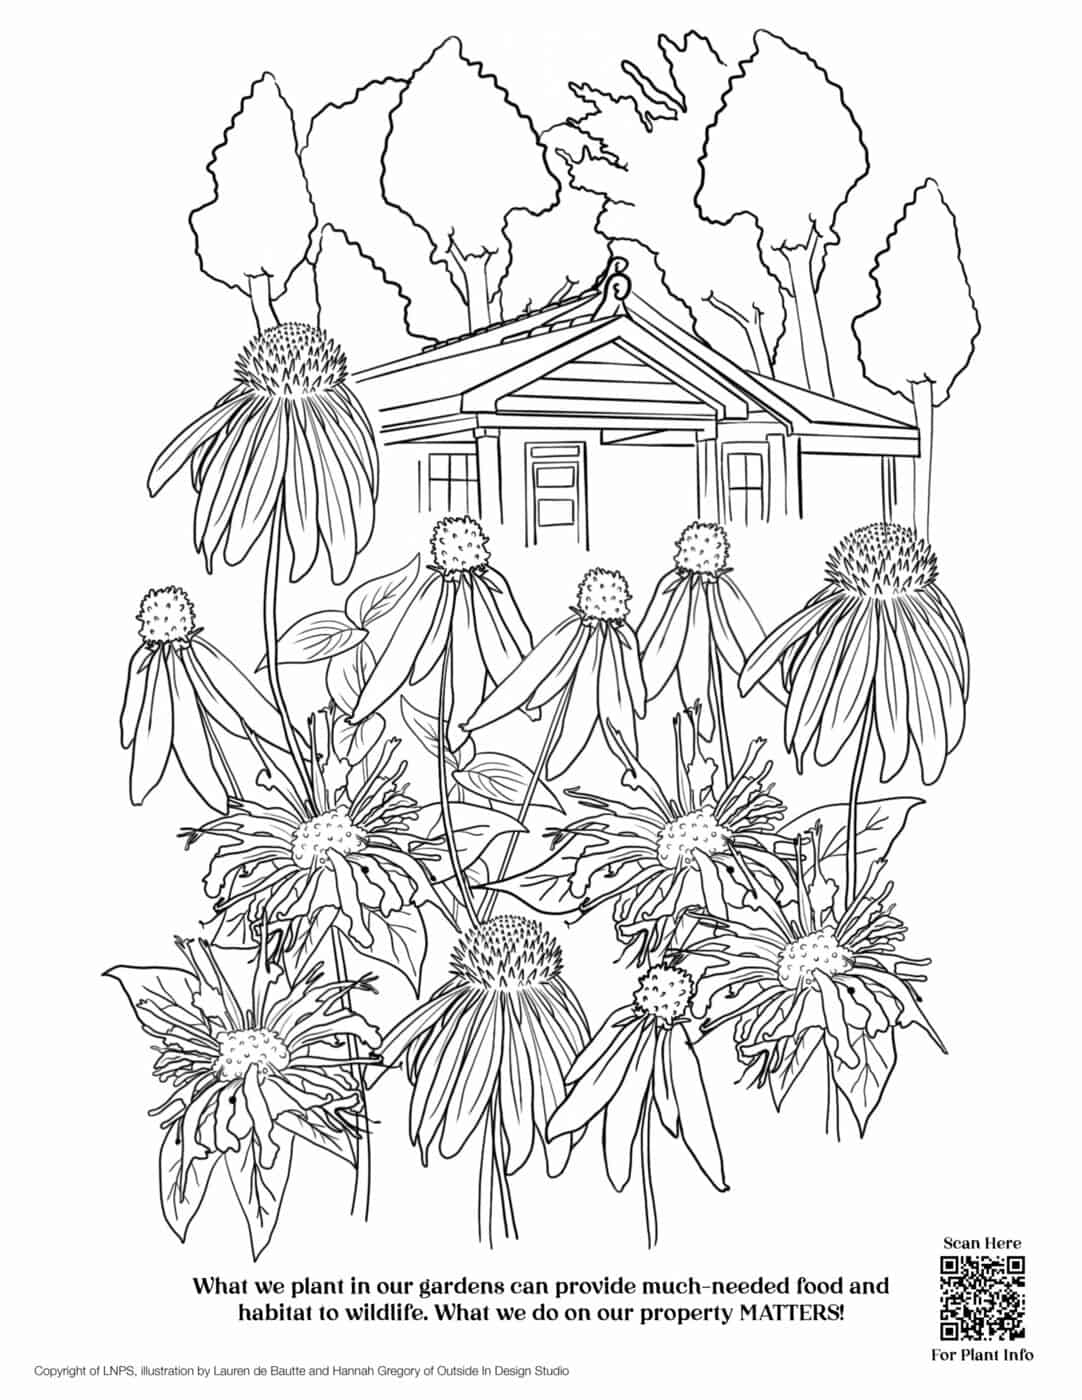 LNPS - Coloring Book - House_with_Diverse_Garden